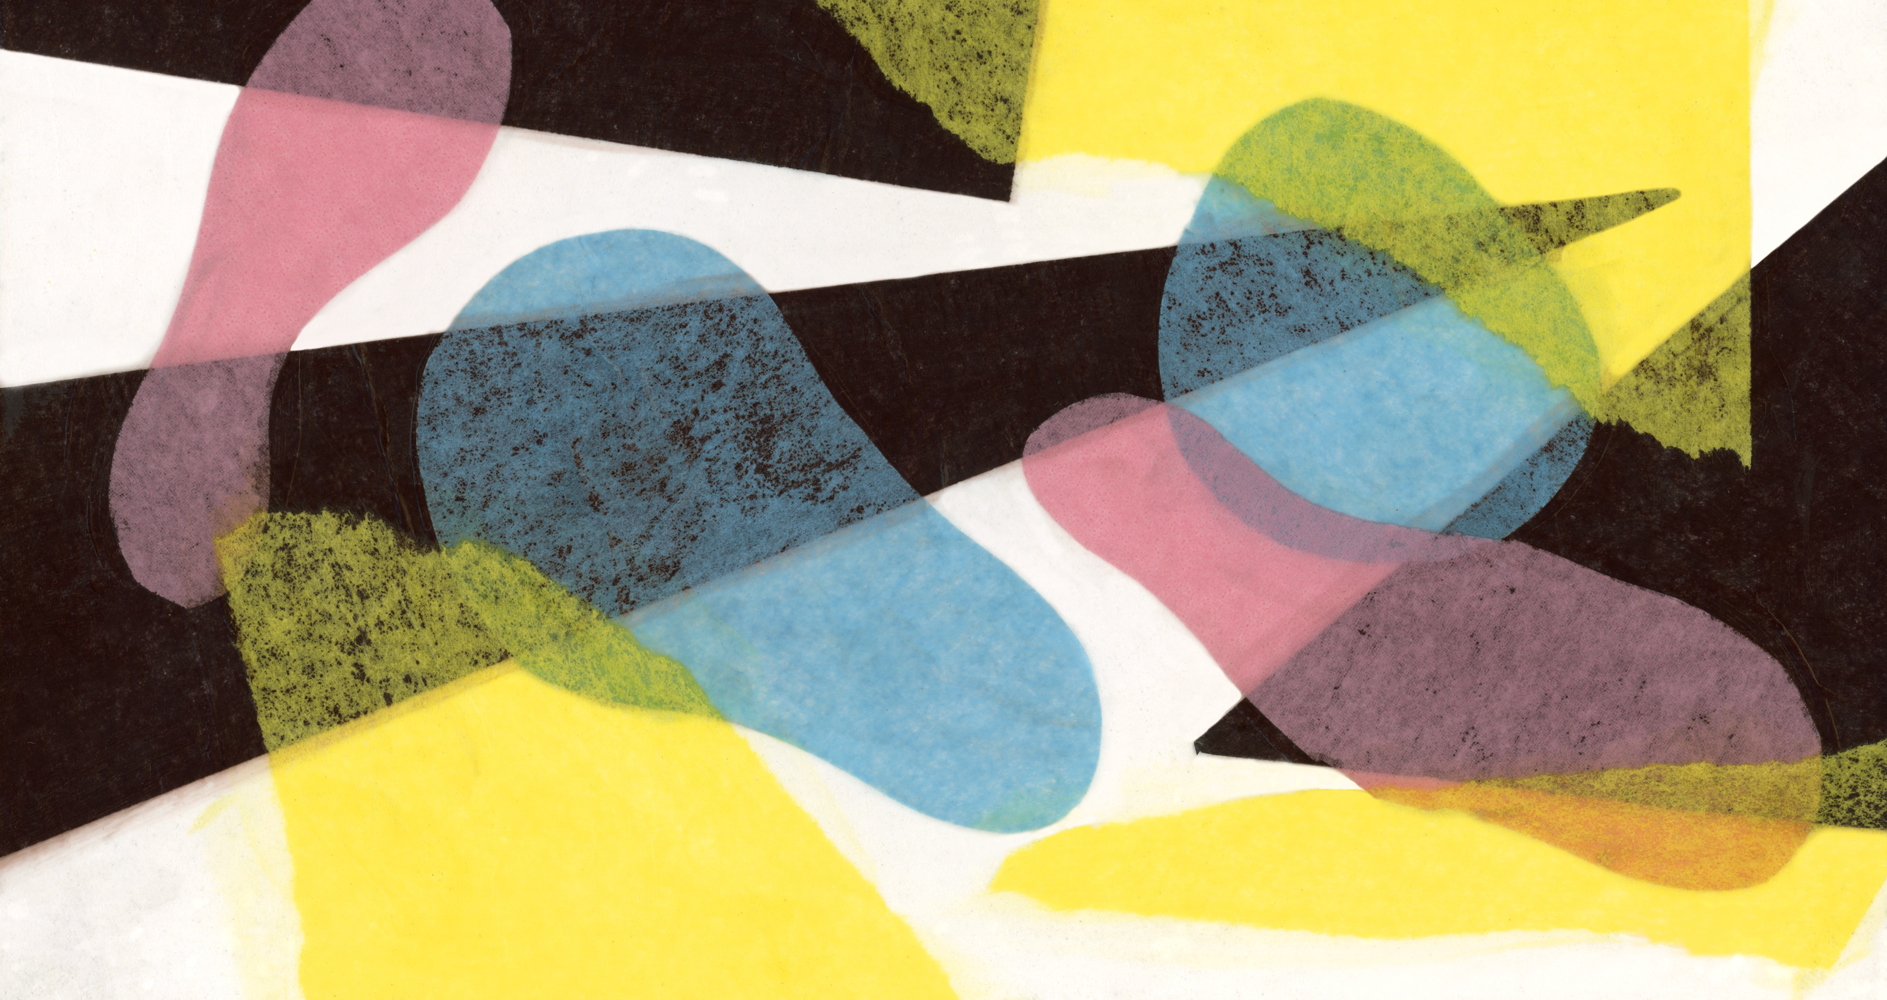 An abstract composition of blue, pink, yellow, and black shapes. Illustration by Ryan Edmund Thiel.